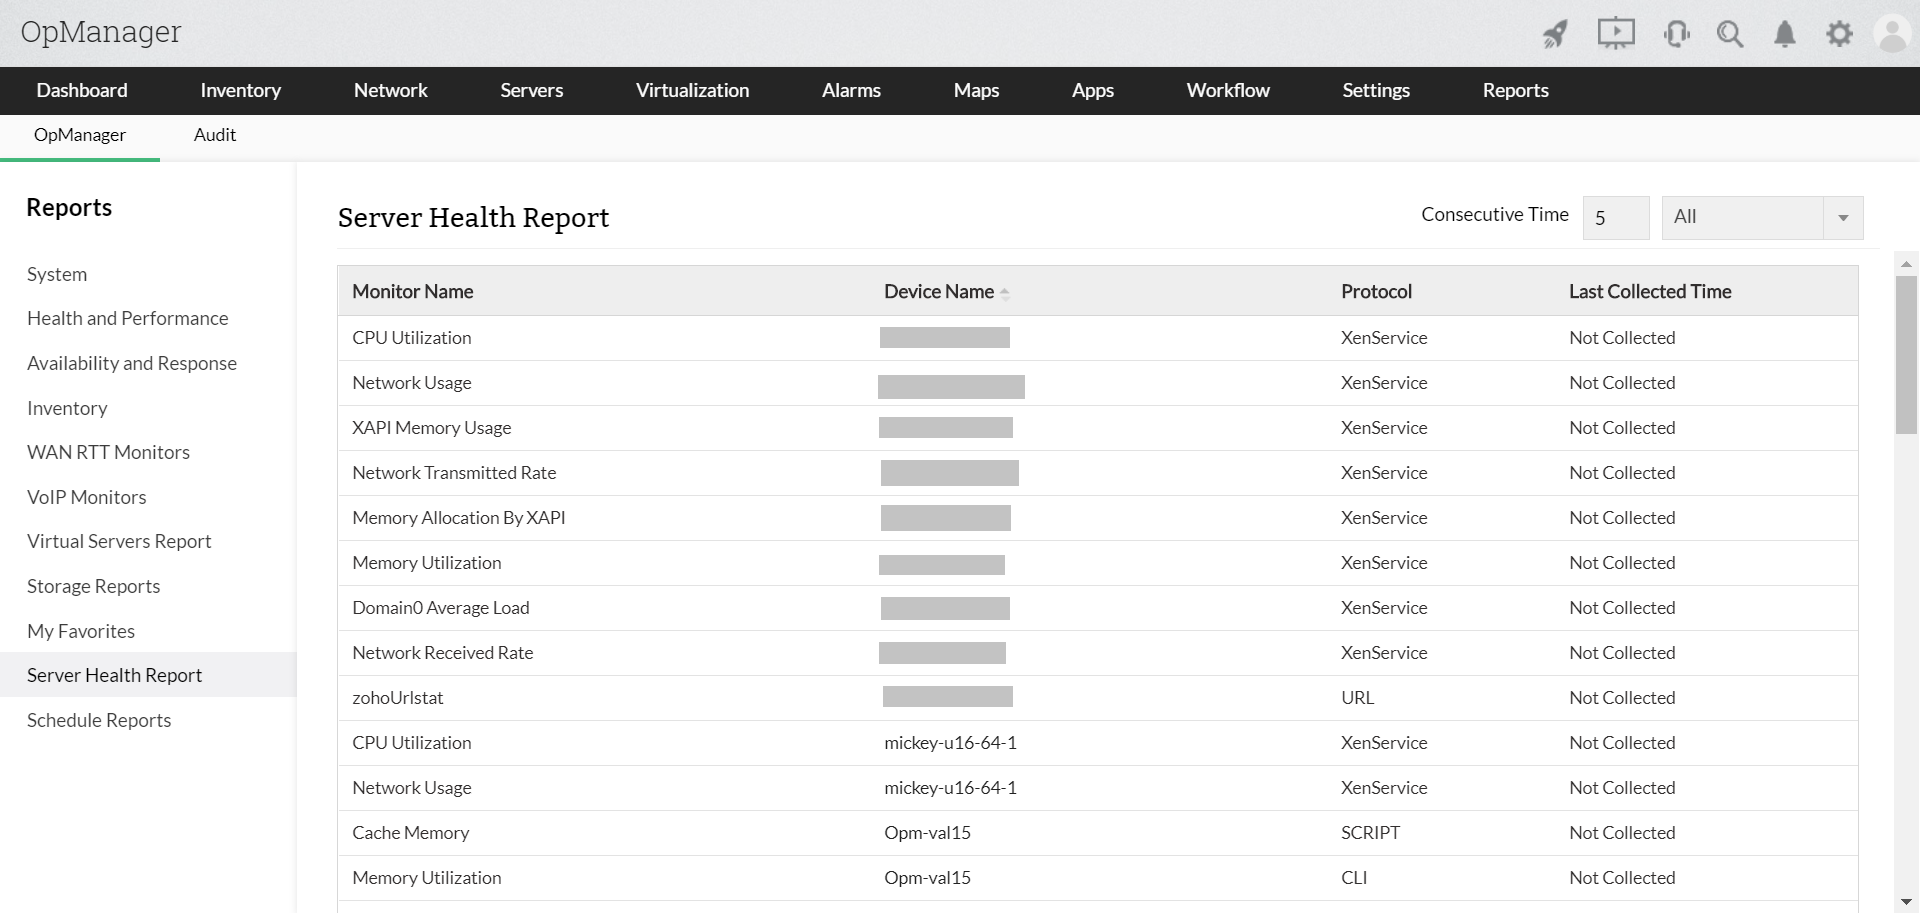 Network Activity Monitor Reports - ManageEngine OpManager